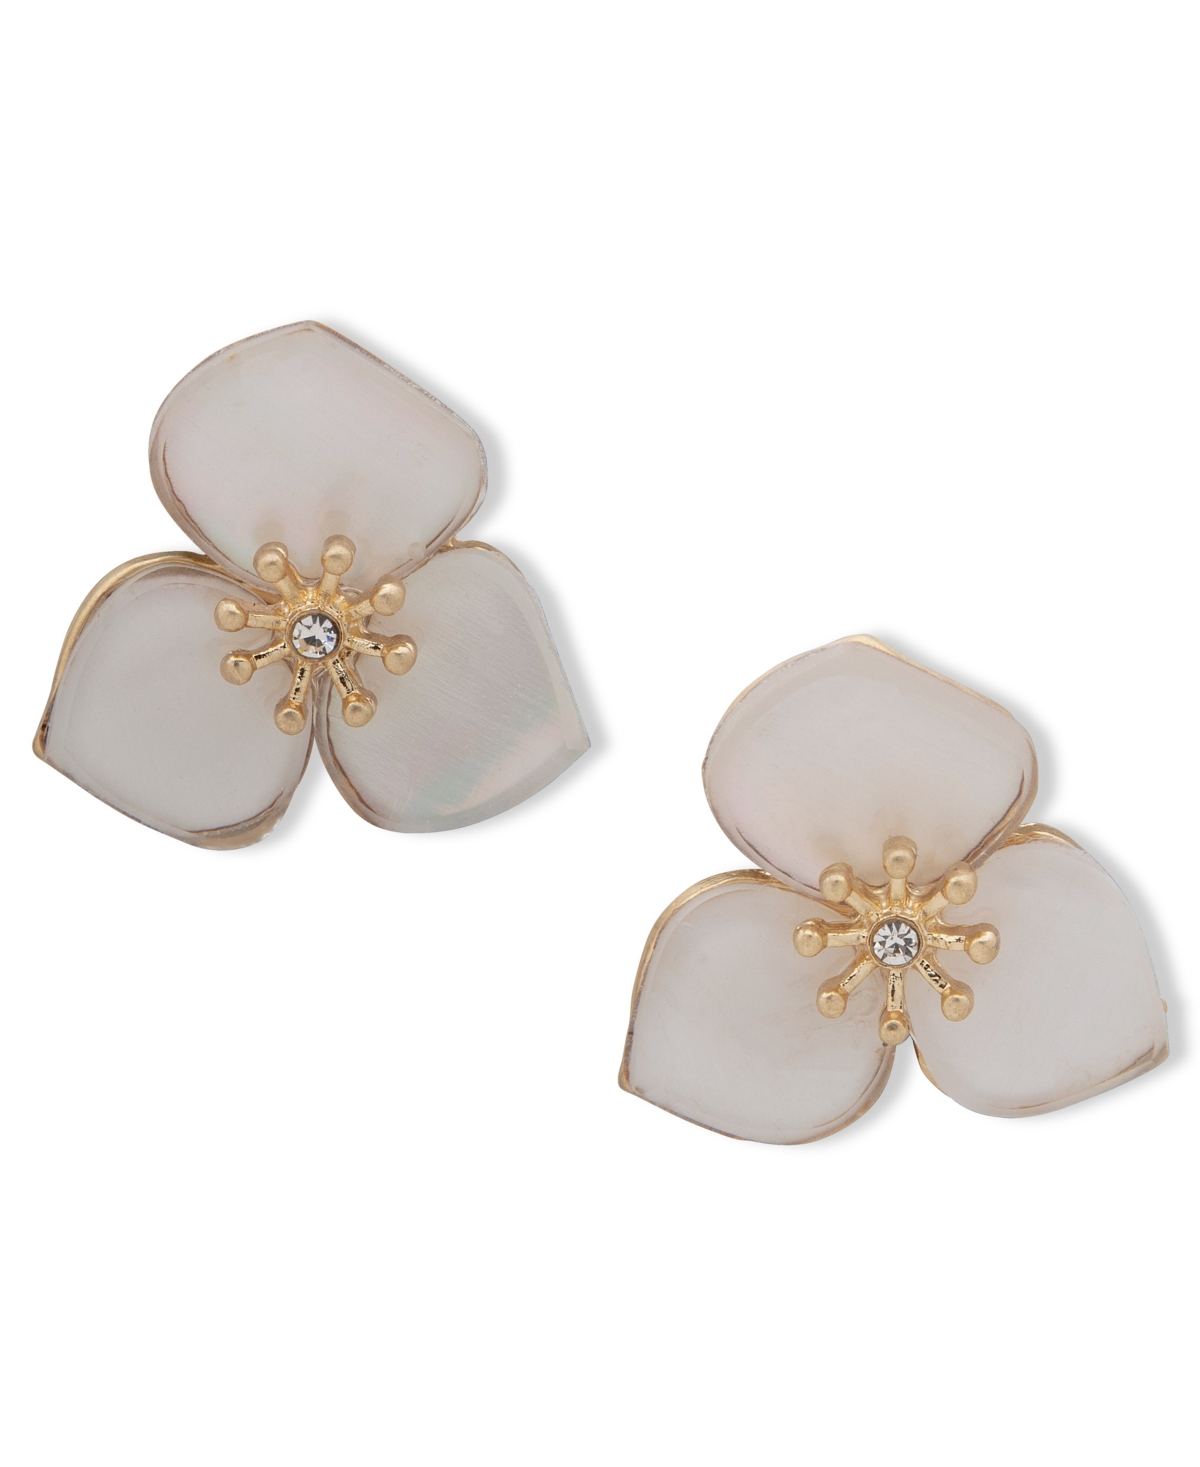 Gold-Tone Pave & Mother-of-Pearl Flower Stud Earrings - White